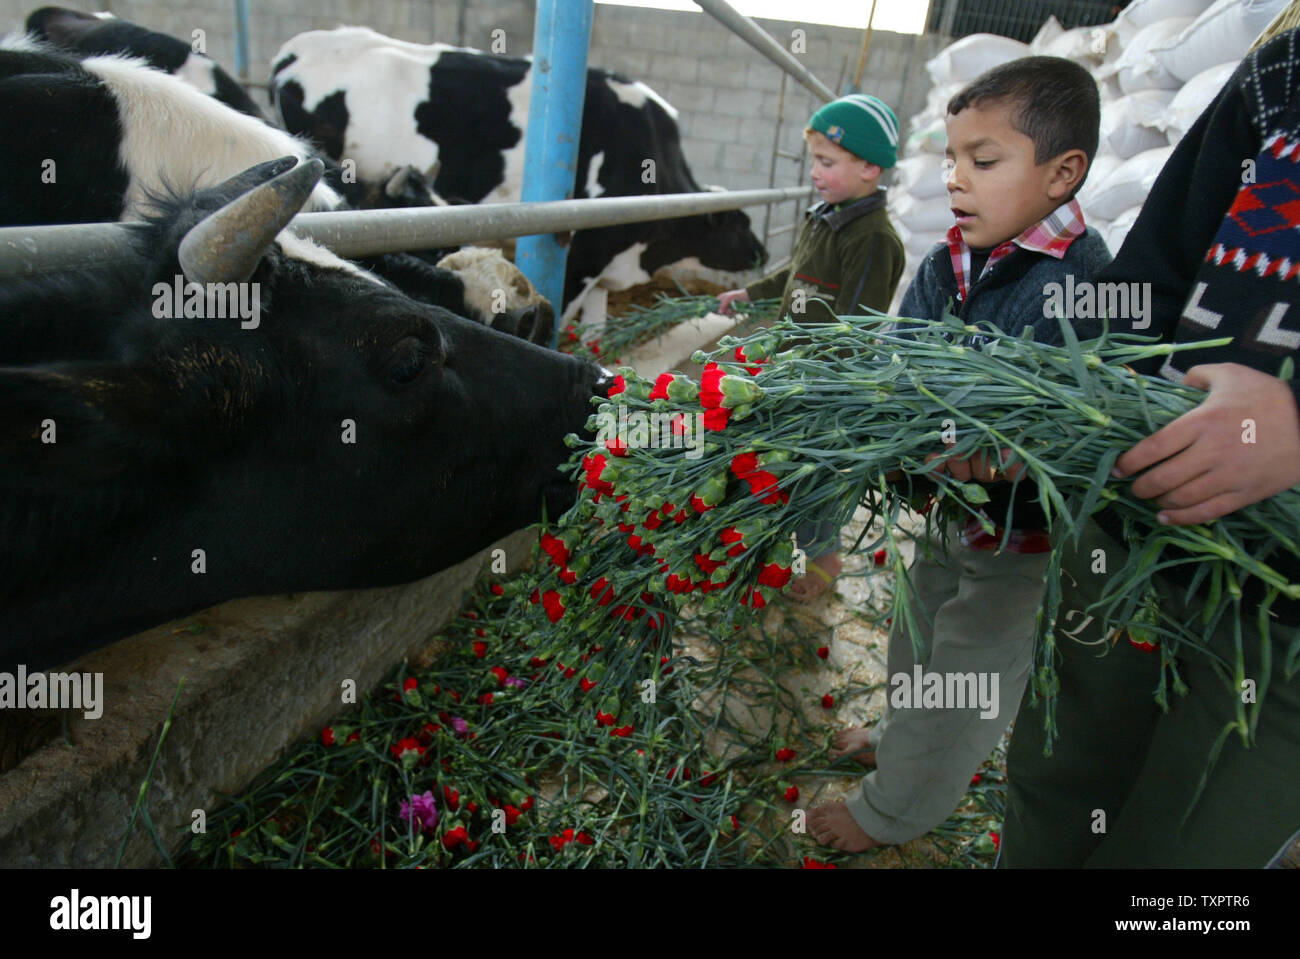 A Palestinian boy feeds flowers to cows on a farm in southern Gaza on February 14, 2008. Palestinians in Gaza, unable to ship their flowers to Europe for Valentine's Day because of Israeli export restrictions, dumped two truckloads of flowers at the Sufa border crossing with the Jewish state on Thursday and fed some of the crop to livestock. (UPI Photo/Ismael Mohamad) Stock Photo